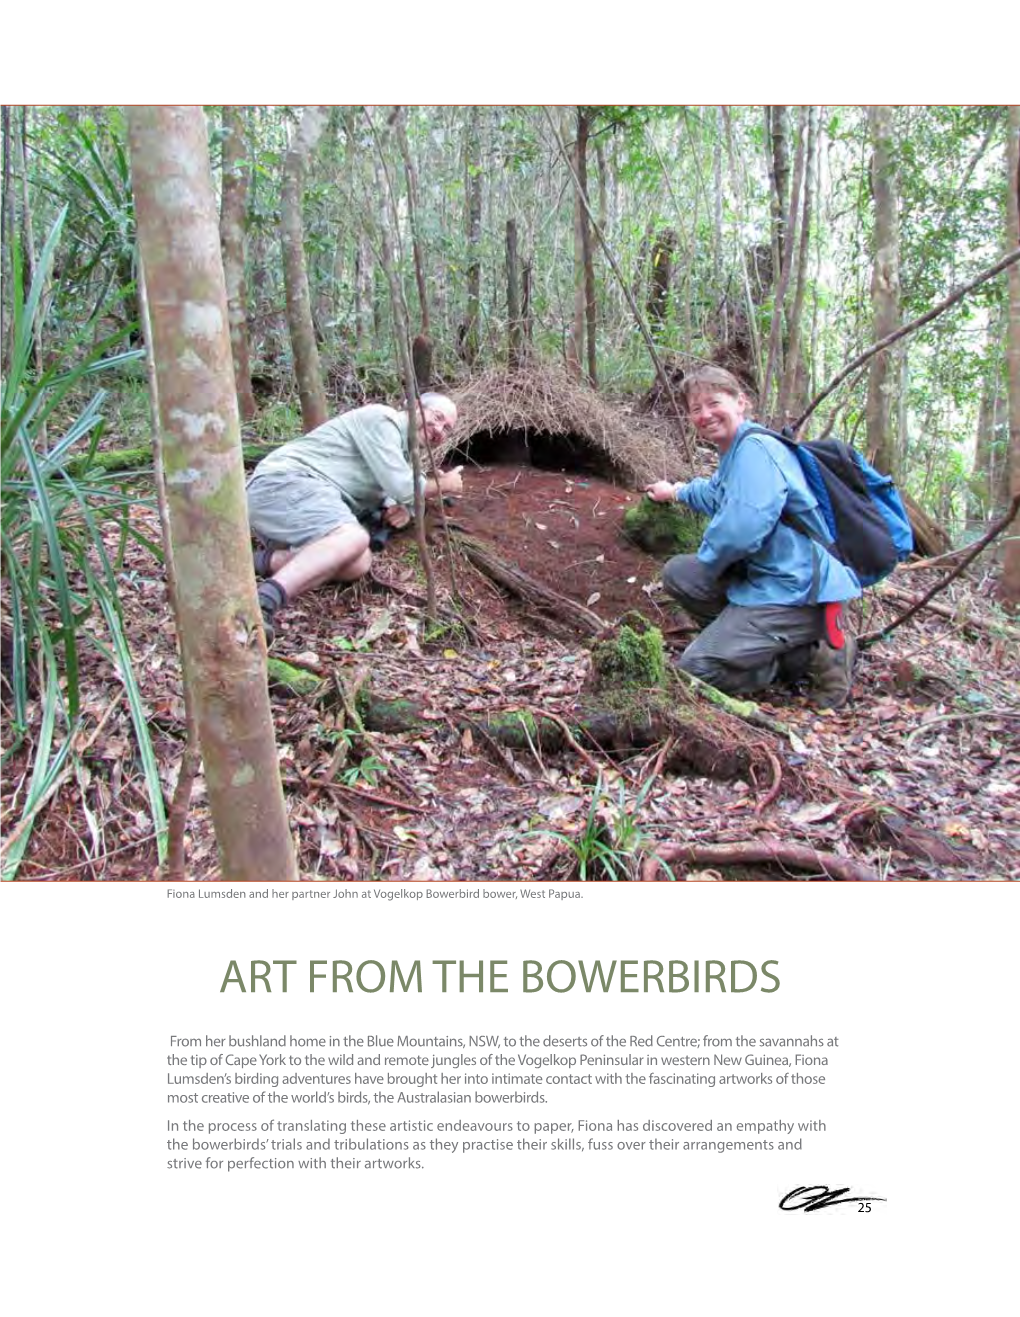 Art from the Bowerbirds